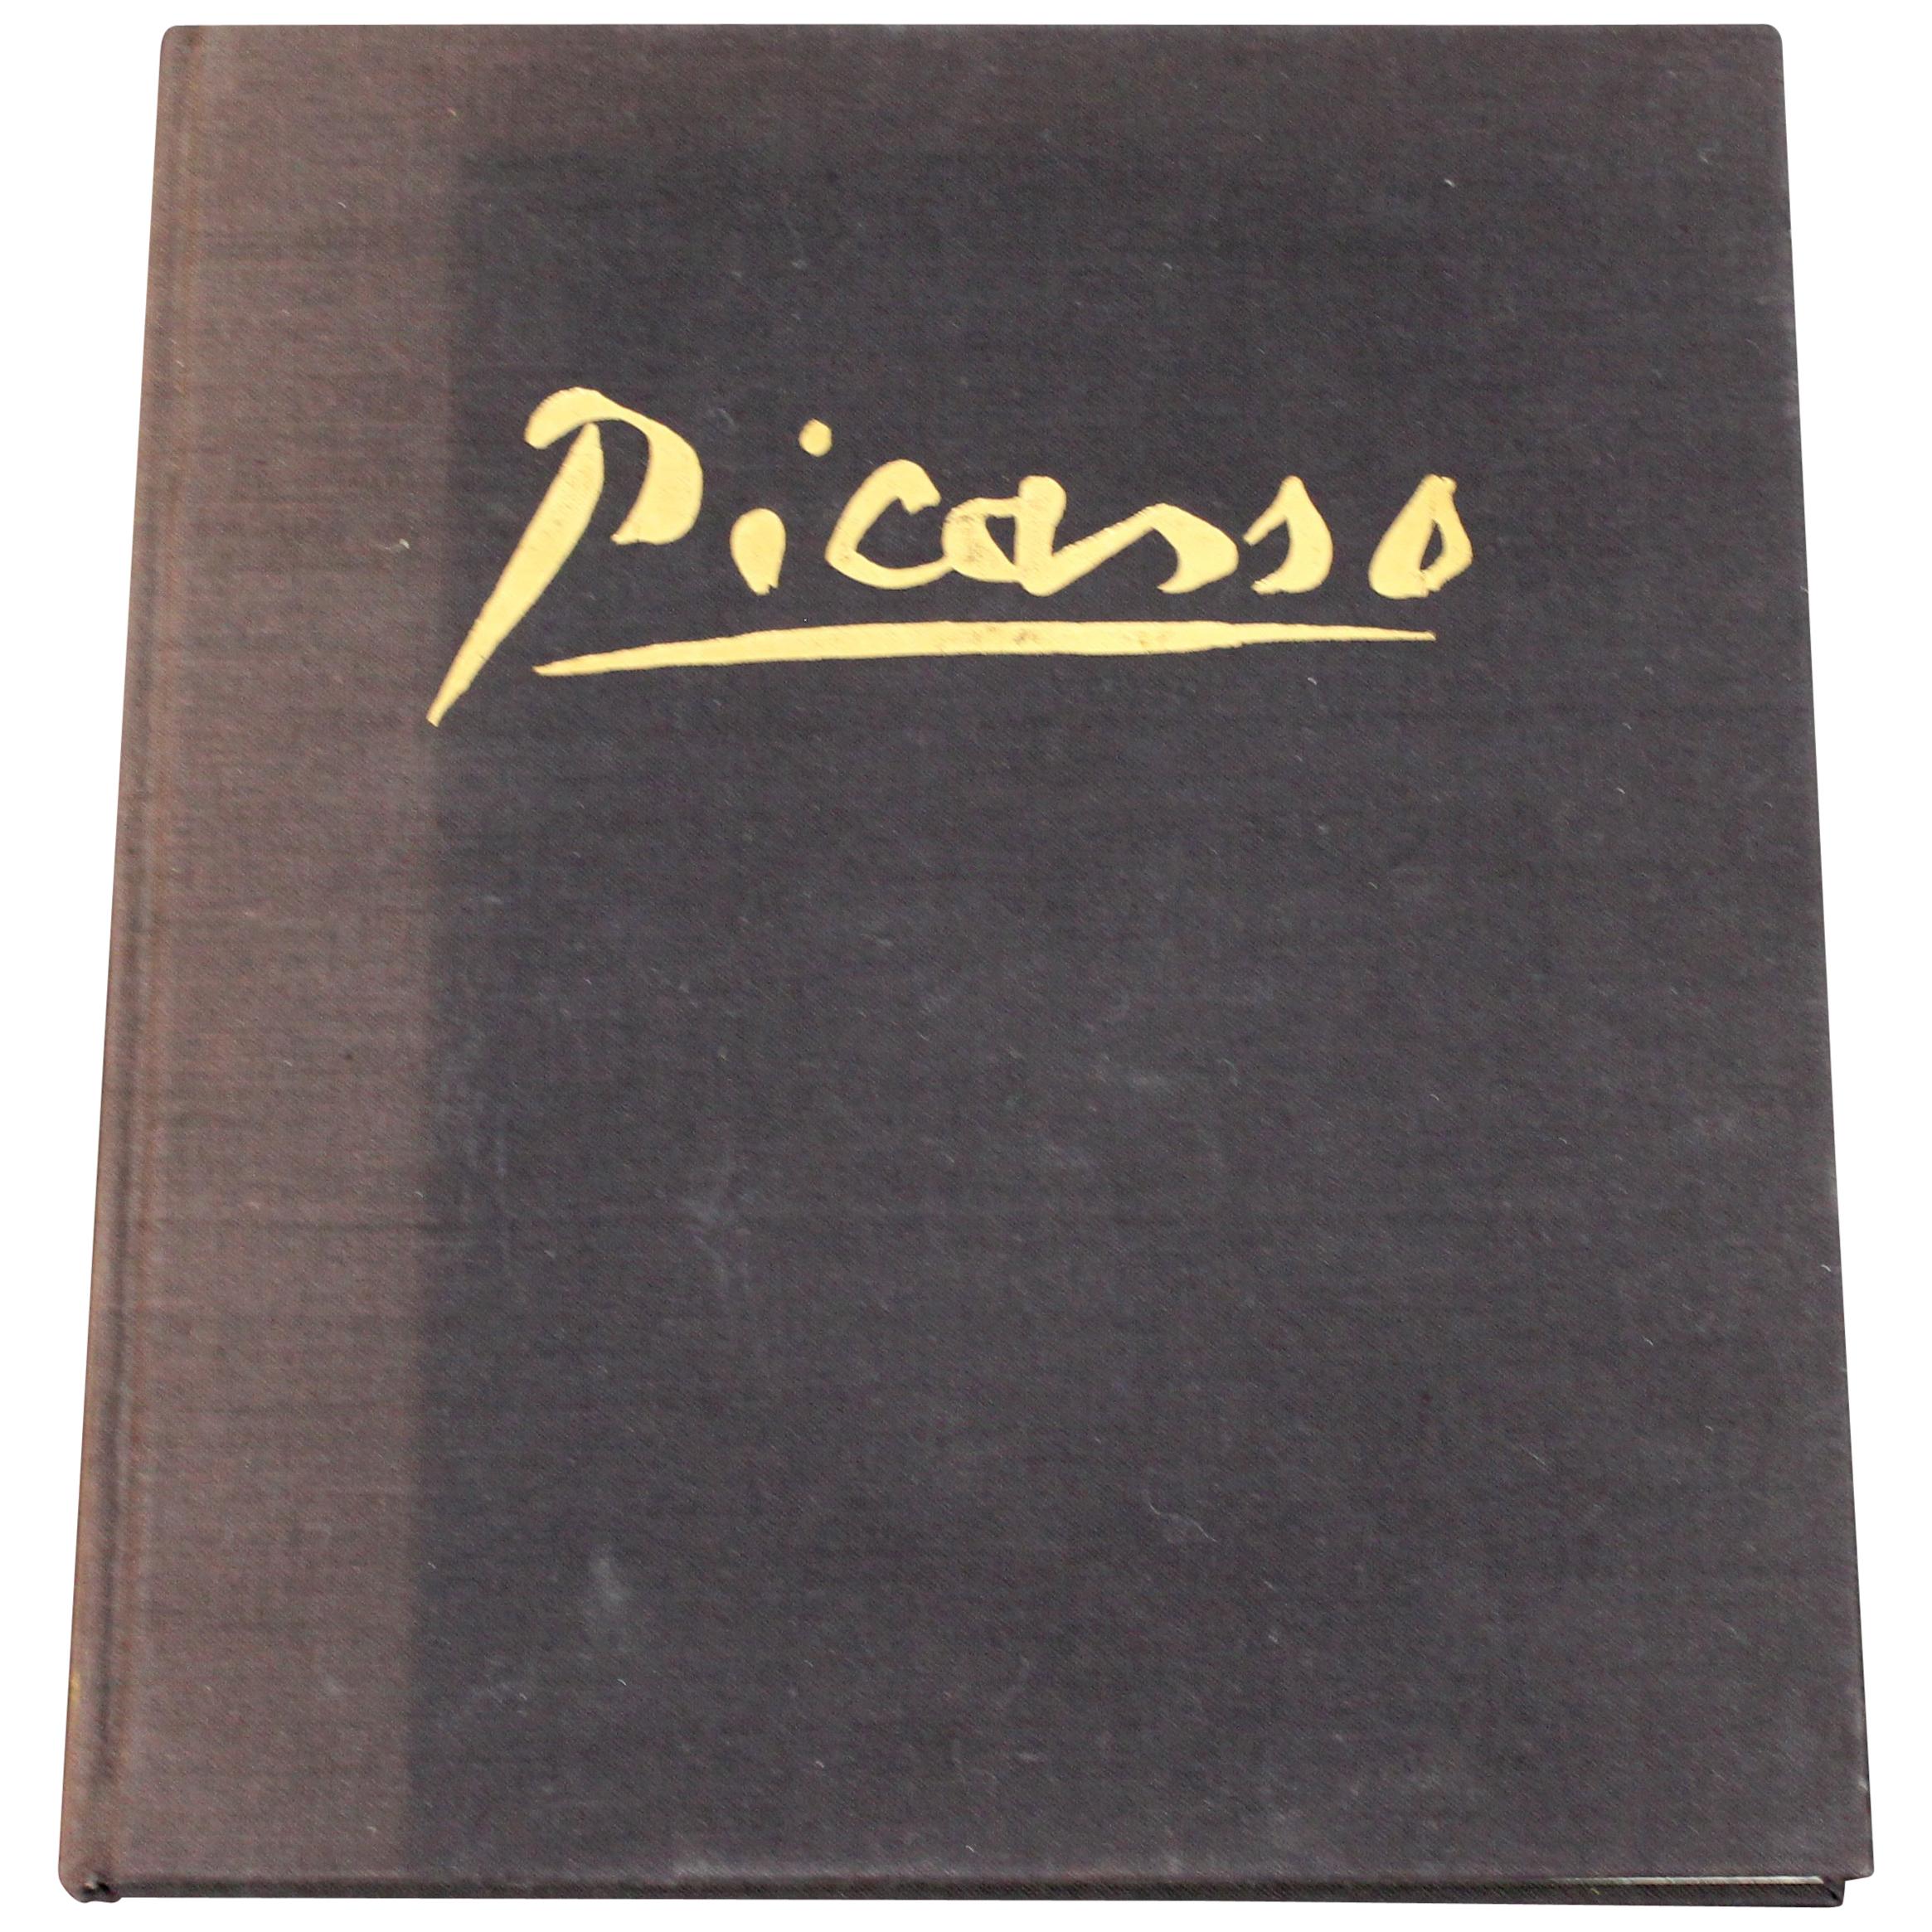 Mid-Century Modern Picasso Art Book by Keith Sutton, 1962